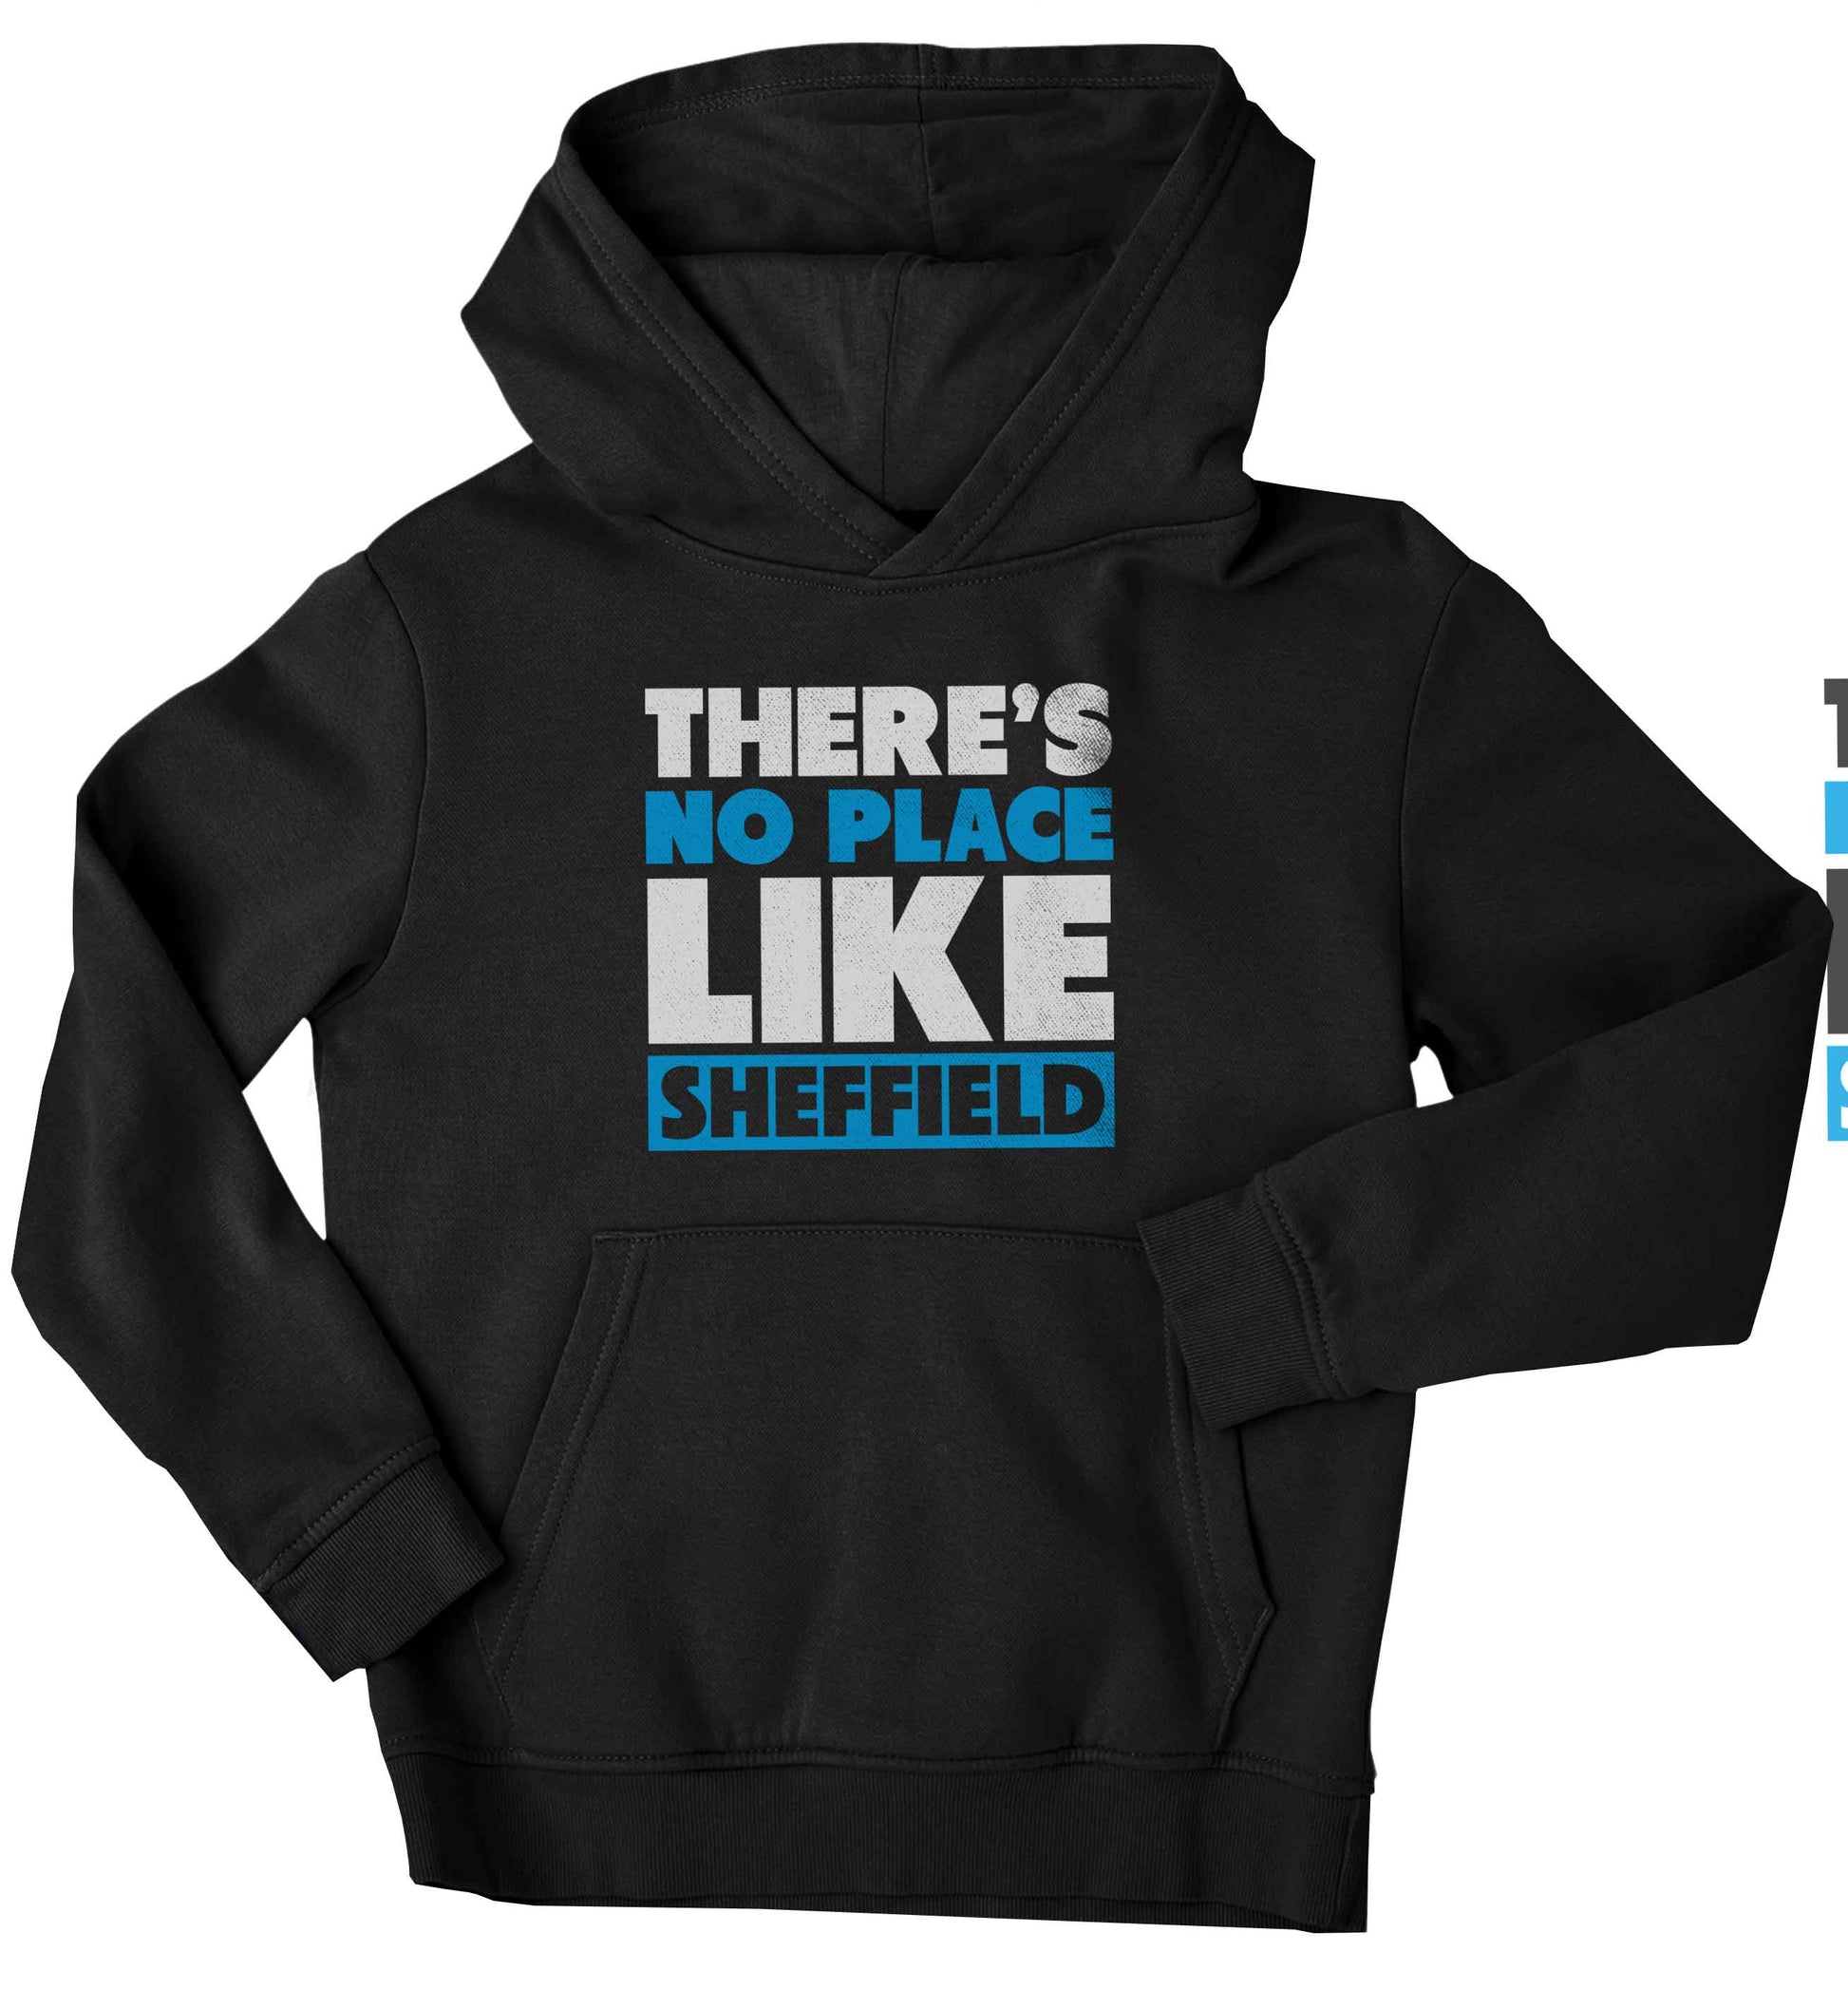 There's no place like Sheffield children's black hoodie 12-13 Years